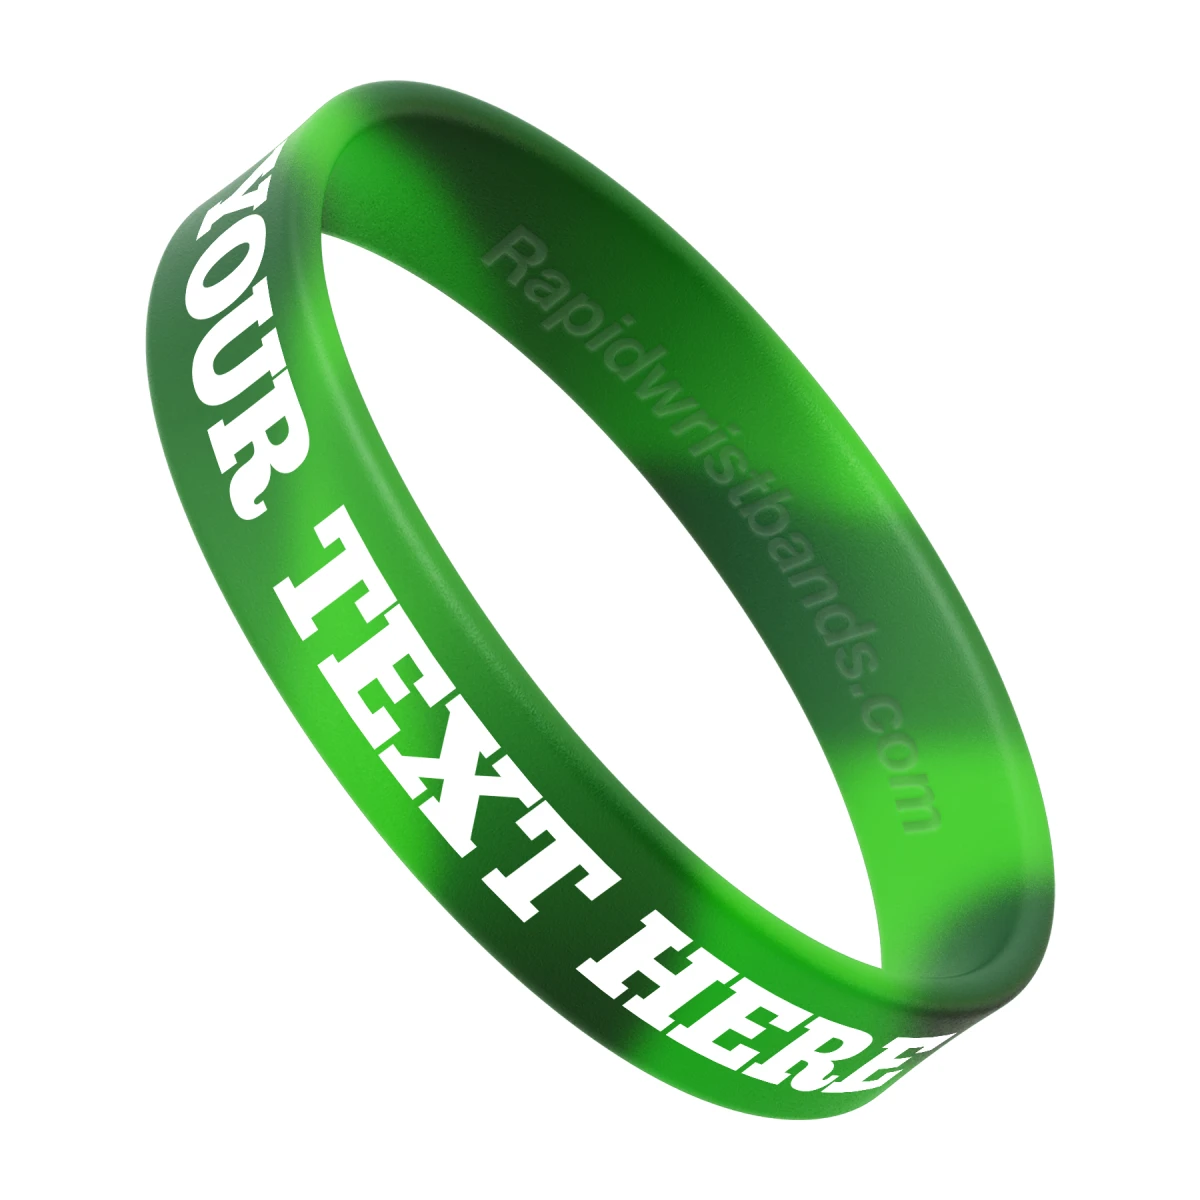 Swirl Green Camo Wristband With Your Text Here Printed In White